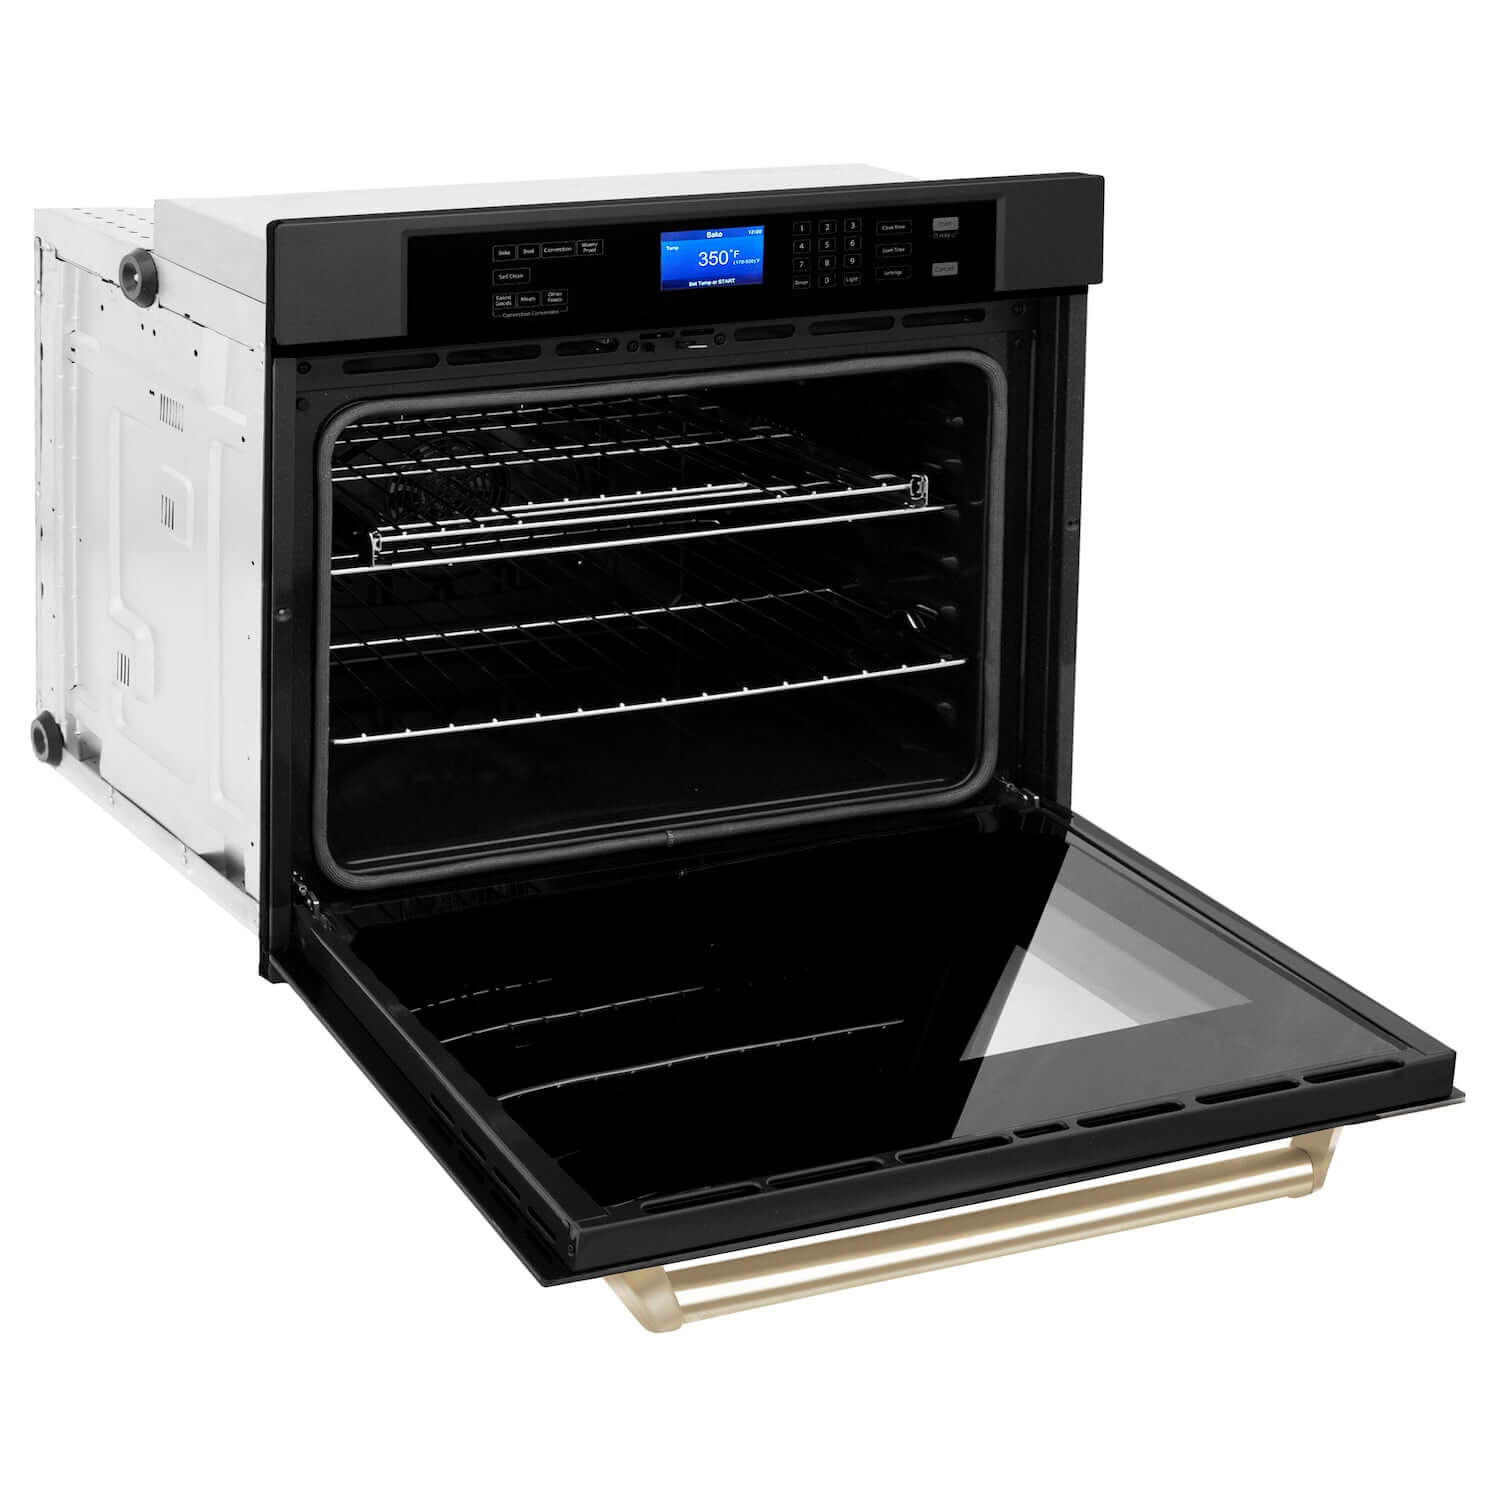 ZLINE Autograph Edition 30 in. Single Wall Oven with Self Clean and True Convection in Black Stainless Steel and Polished Gold Accents (AWSZ-30-BS-G) side, open.